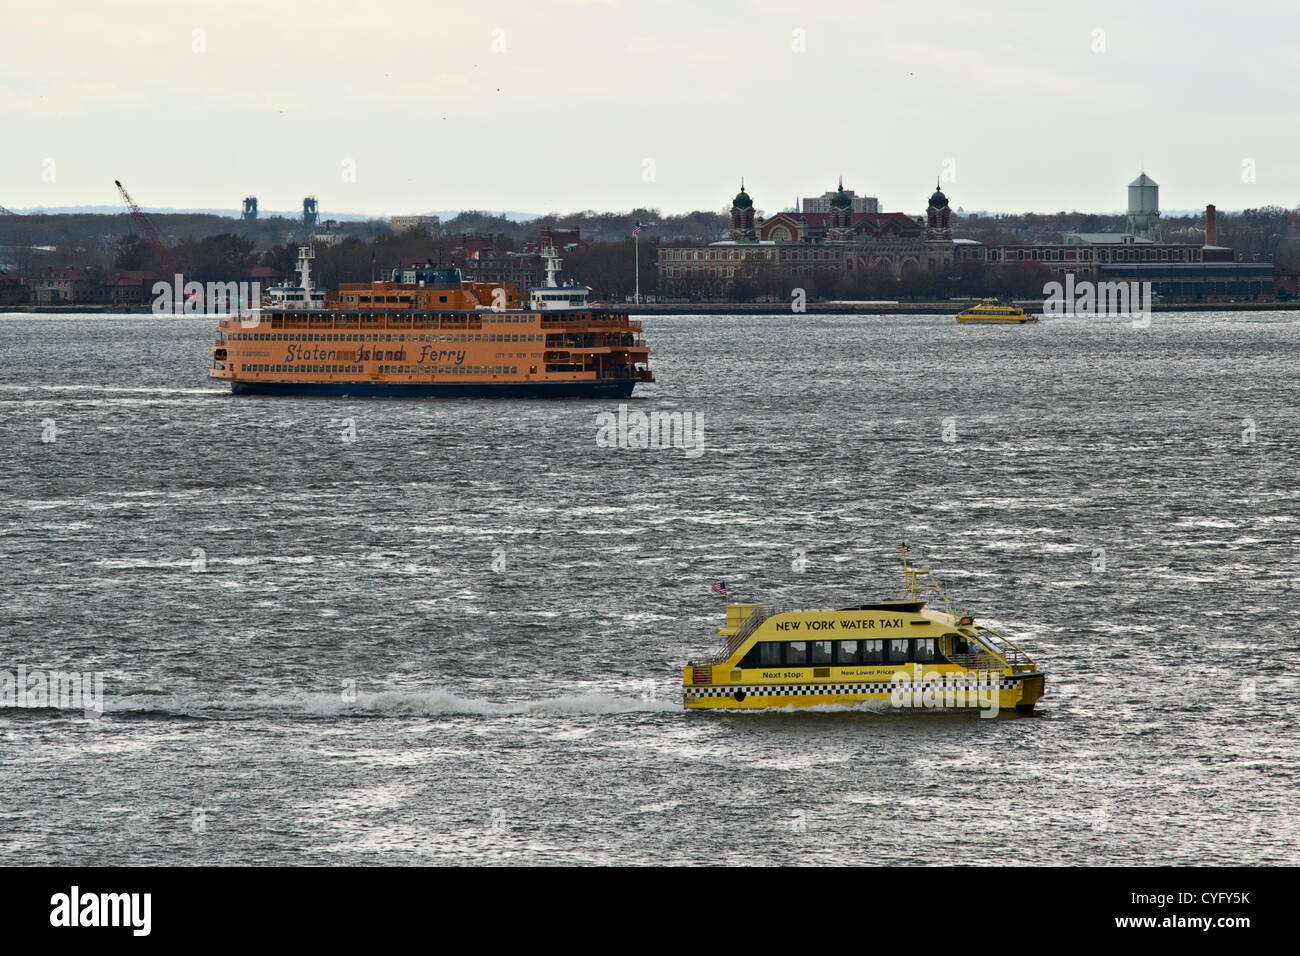 November 2, 2012, New York, NY, US.  A Staten Island Ferry moves between two New York Water Taxi boats.  Staten Island ferry service resumed between Staten Island and Manhattan, four days after Hurricane Sandy crippled New York's public transportation system. Stock Photo